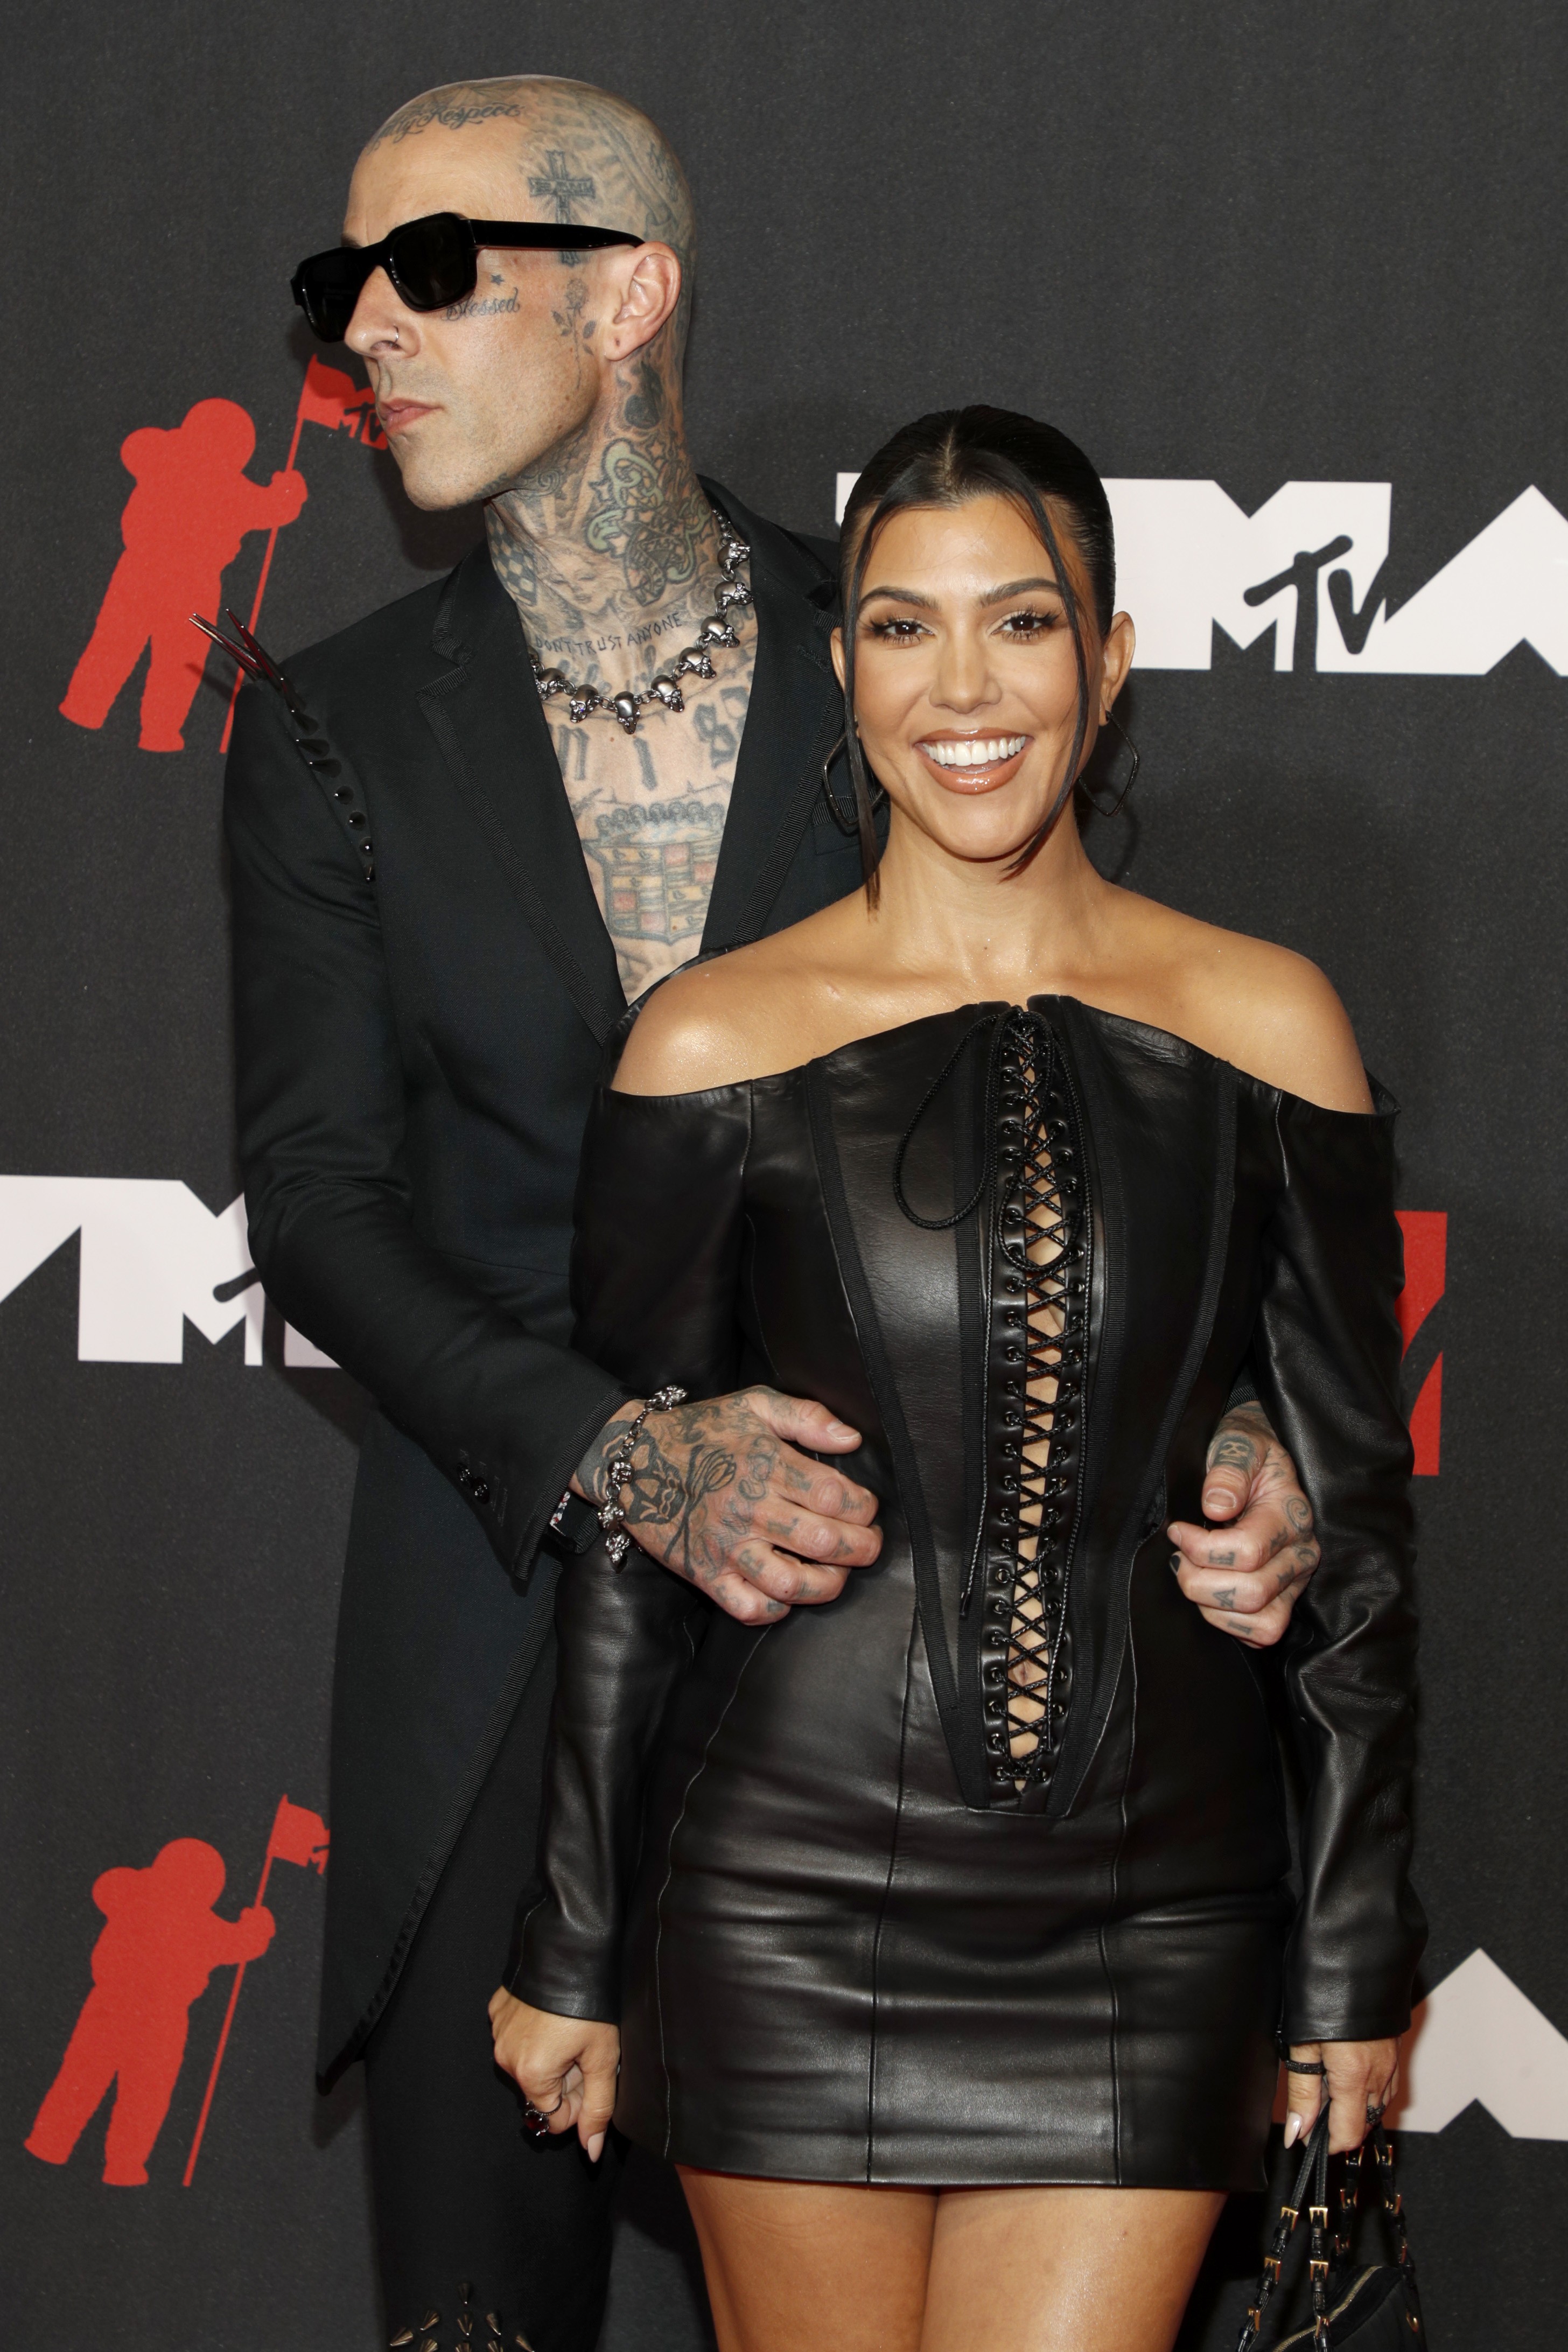 NEW YORK, NEW YORK - SEPTEMBER 12: (L-R) Travis Barker and Kourtney Kardashian attend the 2021 MTV Video Music Awards at Barclays Center on September 12, 2021 in the Brooklyn borough of New York City. (Photo by Astrid Stawiarz/WireImage) (Foto: WireImage)